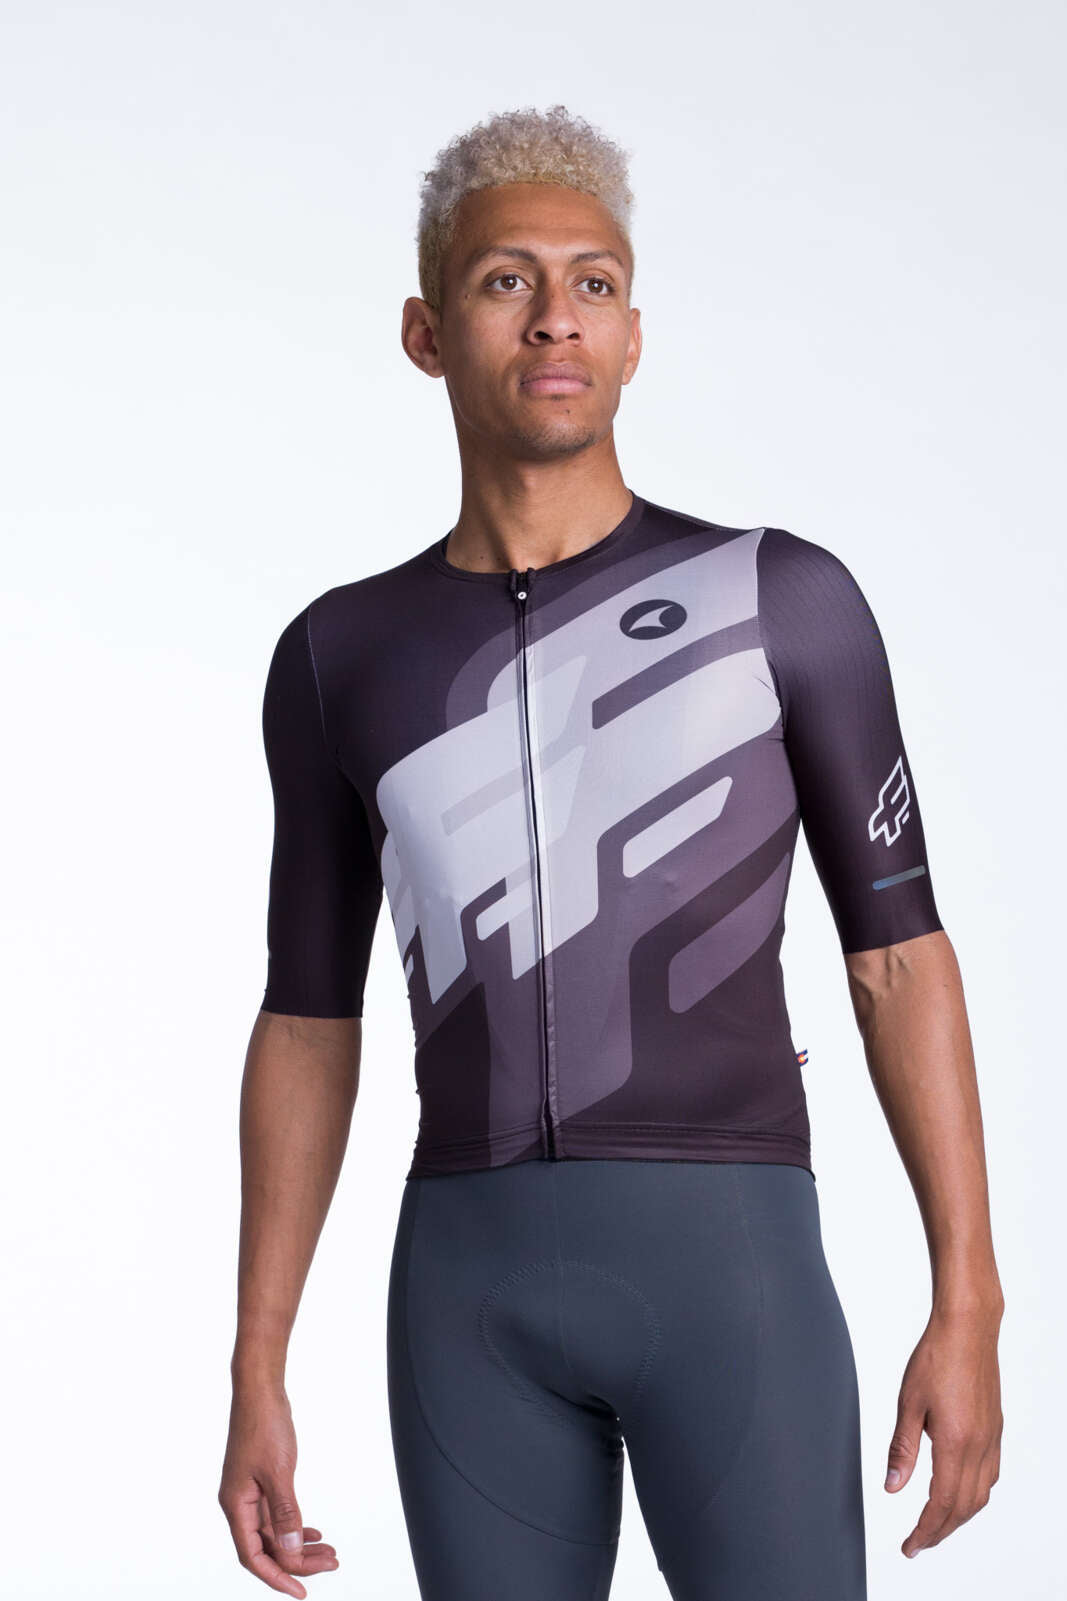 Men's Black Aero Cycling Jersey - Flyte Front View